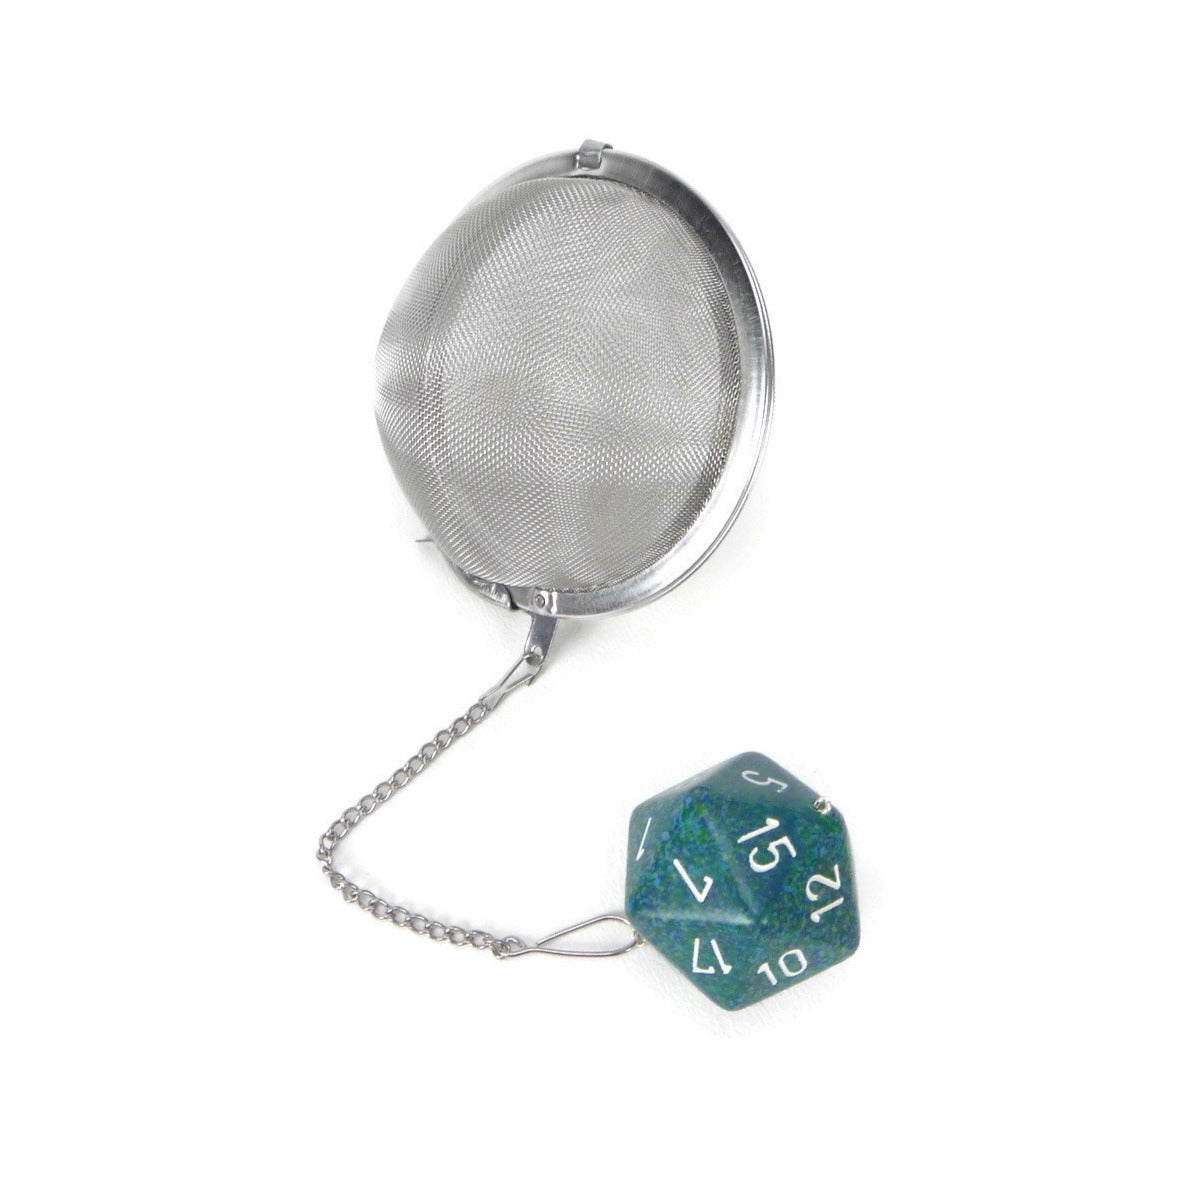 3 Inch Tea Infuser Ball with Large d20 - Sea Blue